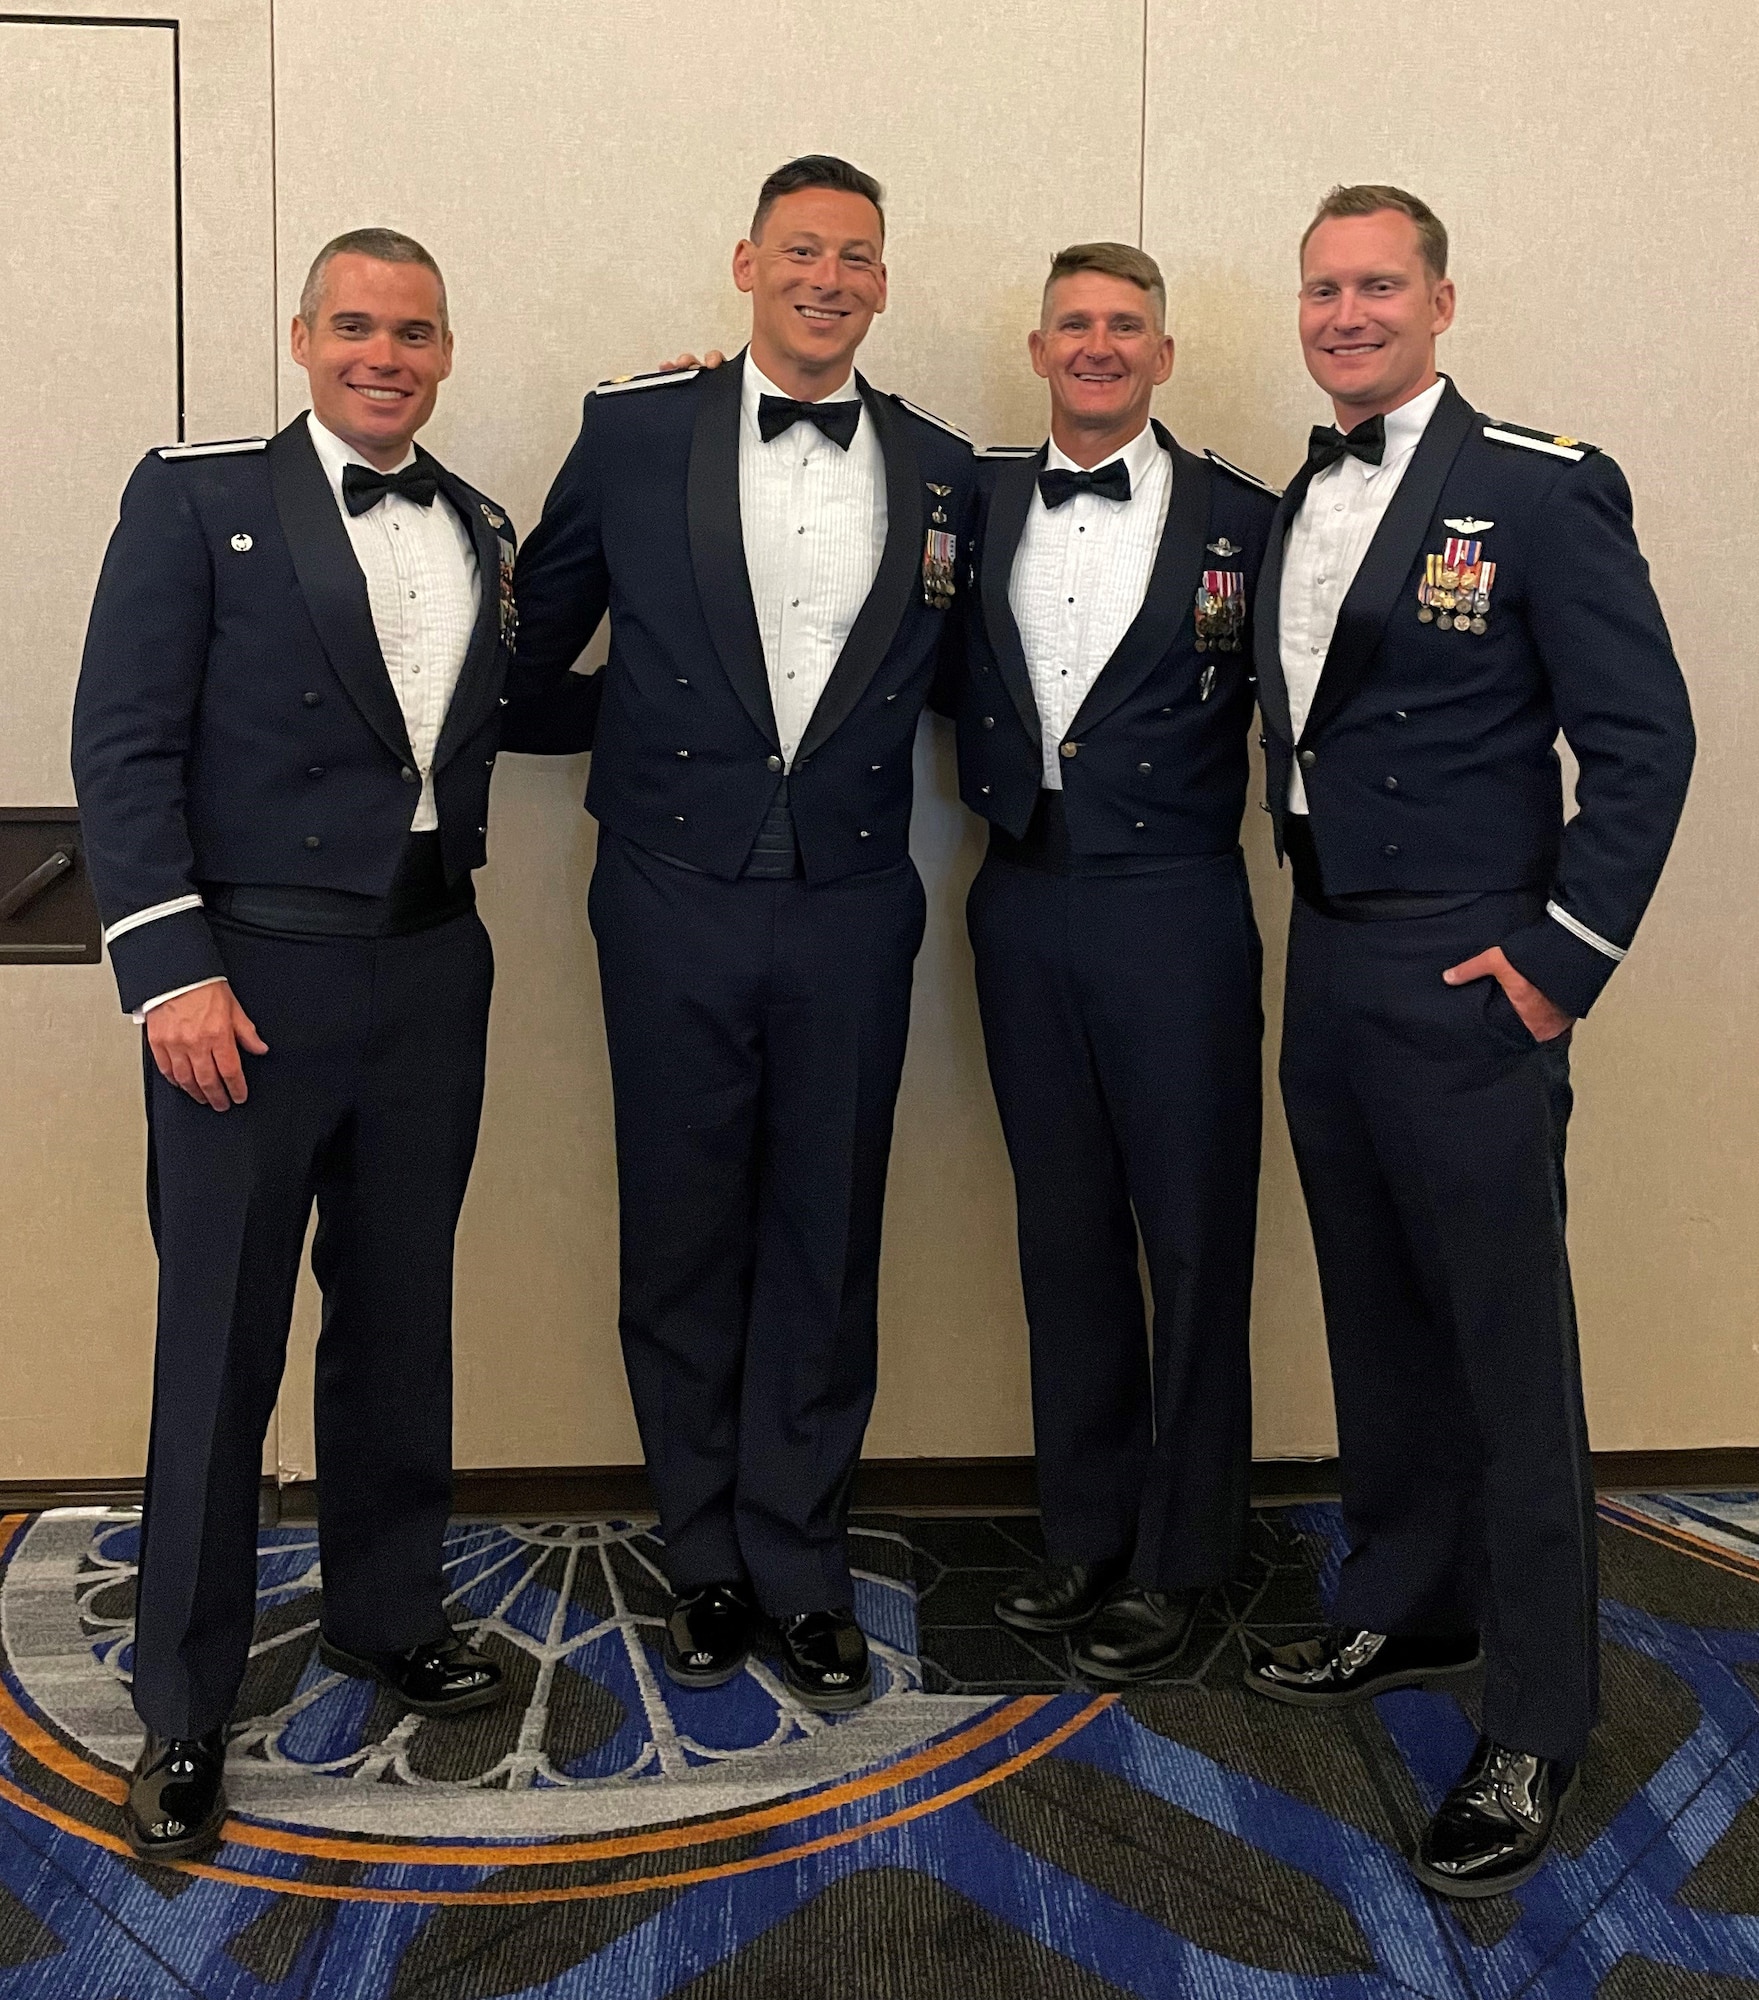 An image of, from left, U.S. Air Force Lt. Col. Michael K. Long 119th Fighter Squadron commander, Maj. Nicholas A. Loglisci, 119 FS chief of weapons and tactics, Col. Derek B. Routt, 177th Fighter Wing commander, and Maj. Eric R. Emerson, 119 FS director of operations, posing for a group photo at a banquet celebrating Loglisci’s graduation from USAF Weapons School on June 11, 2022 at Nellis Air Force Base, Nevada.